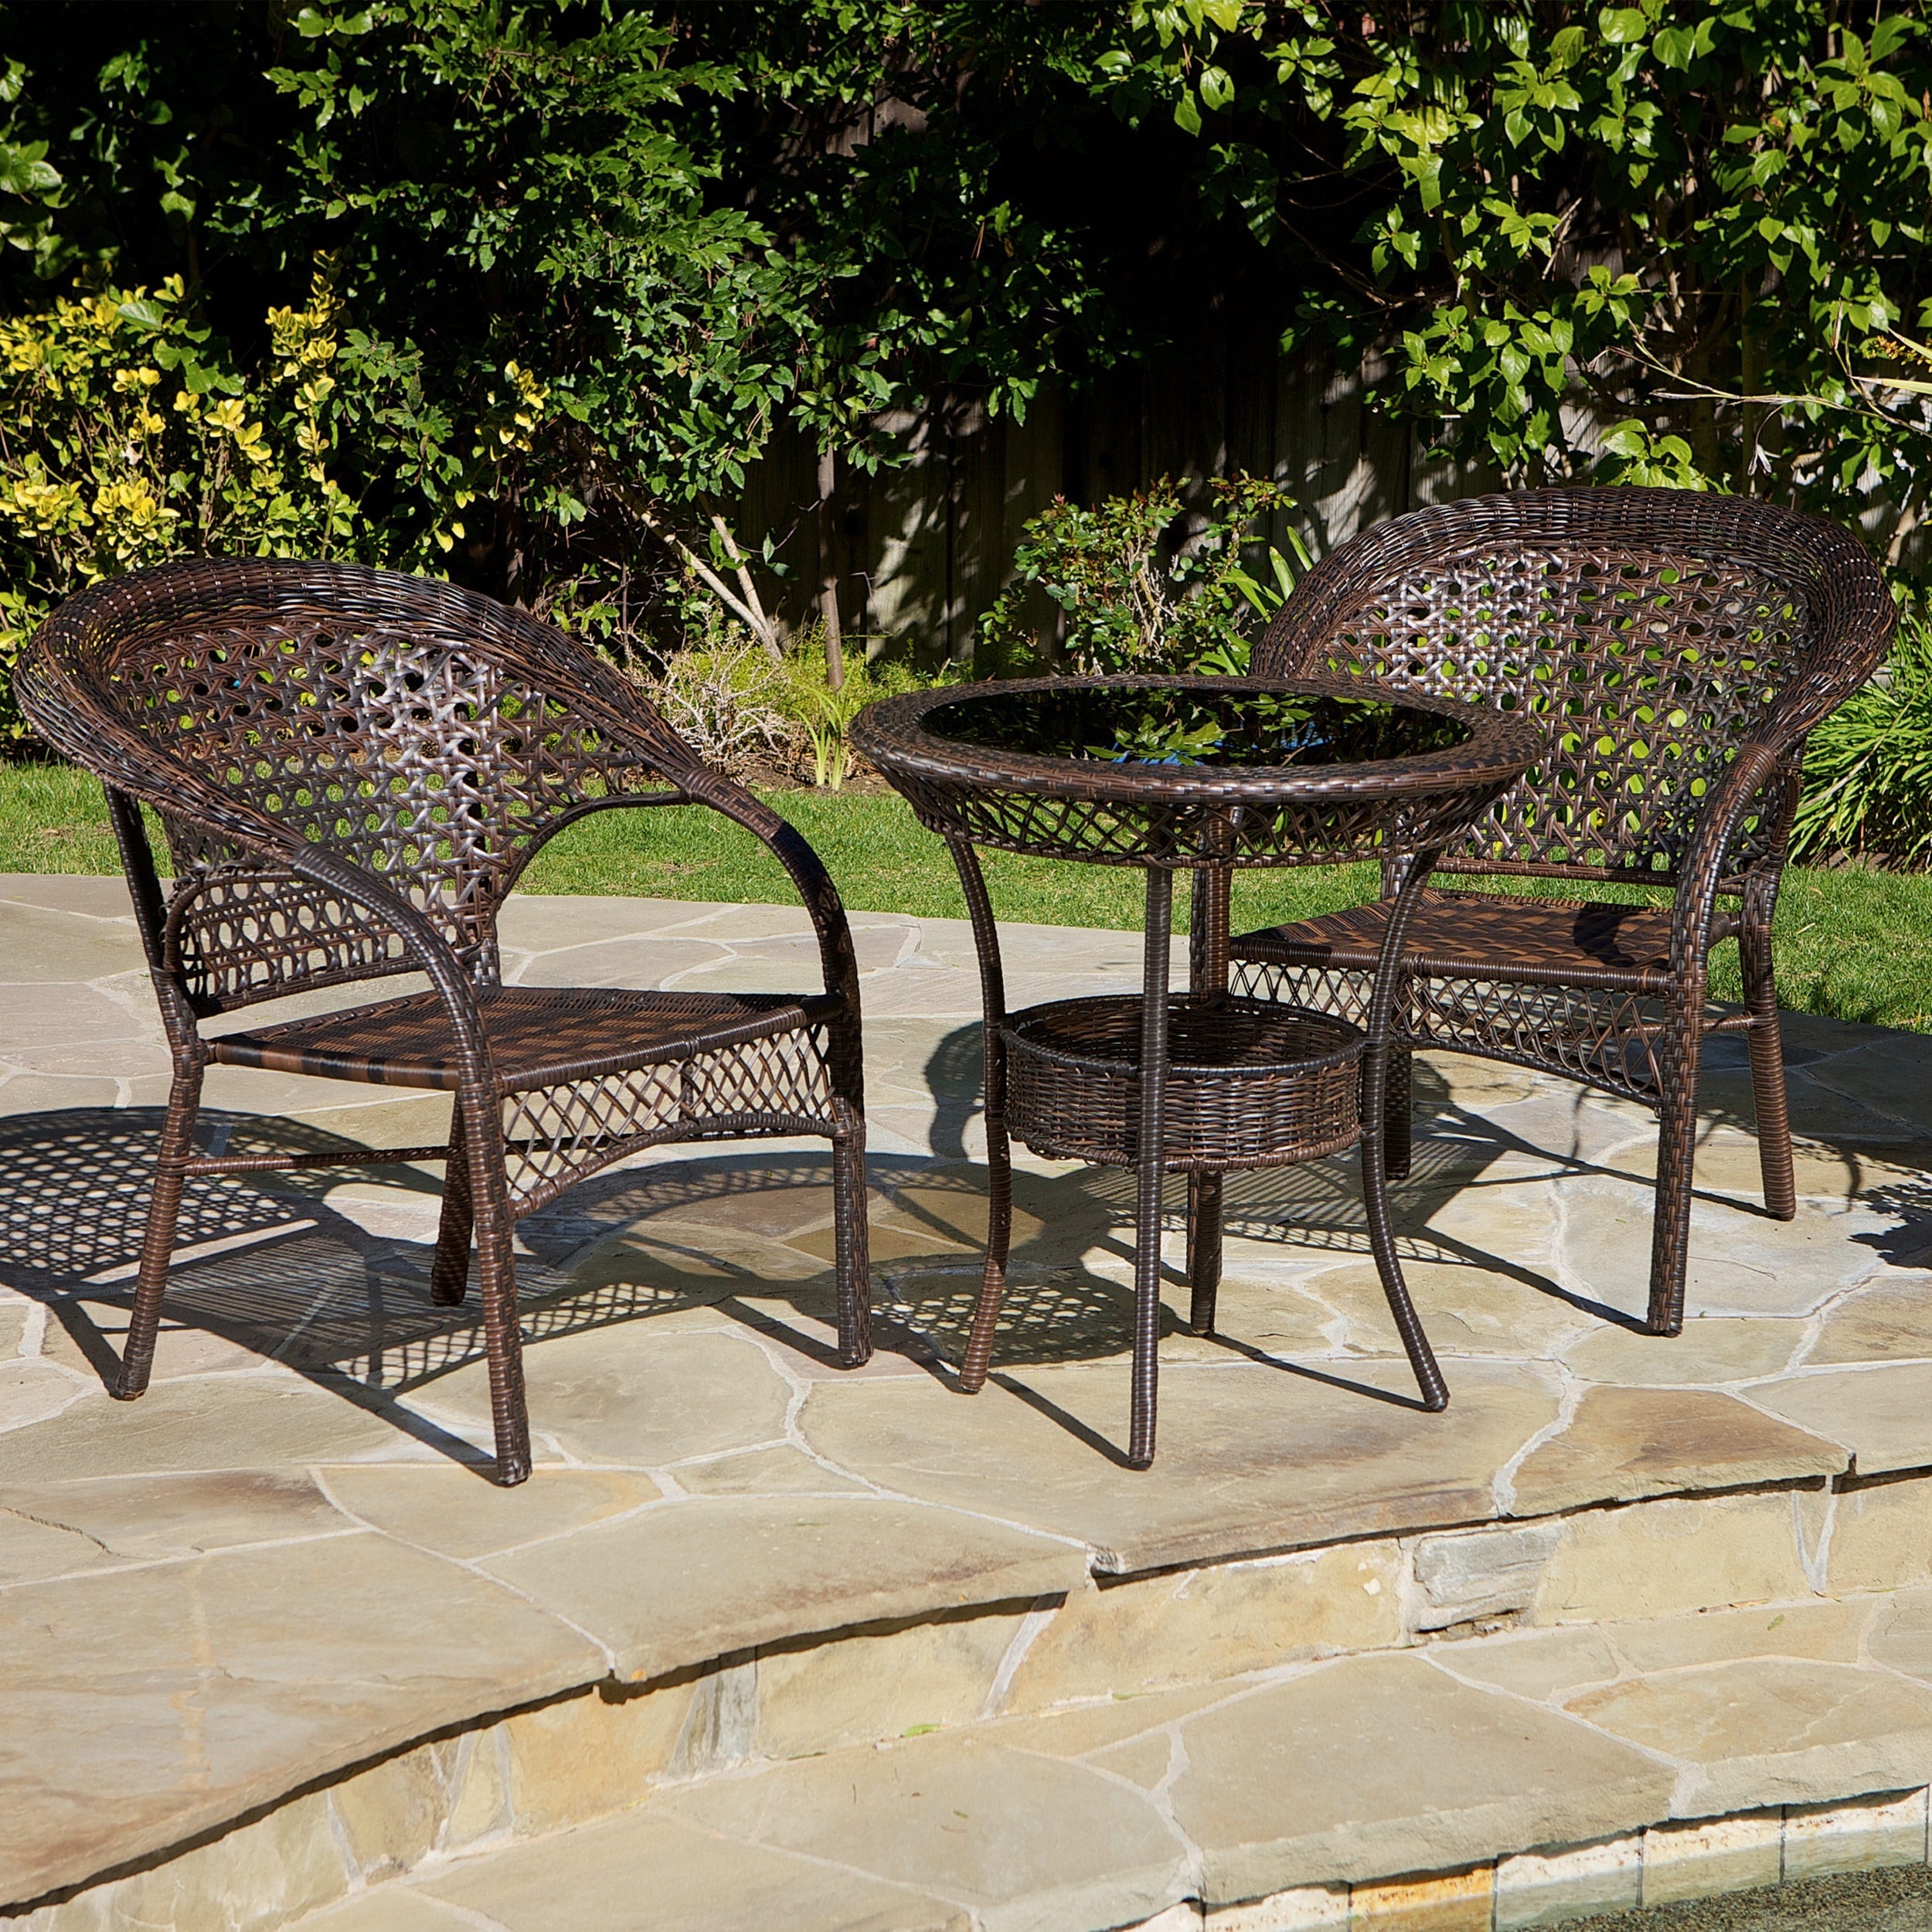 Christopher Knight Home Outdoor Wicker 3 piece Bistro Set (BrownMaterials PE wickerFinish BrownNo cushions includedWeather resistantUV protectionInset amber glass top for a smooth and elegant table topChair dimensions 31.16 inches high x 26.88 inches w